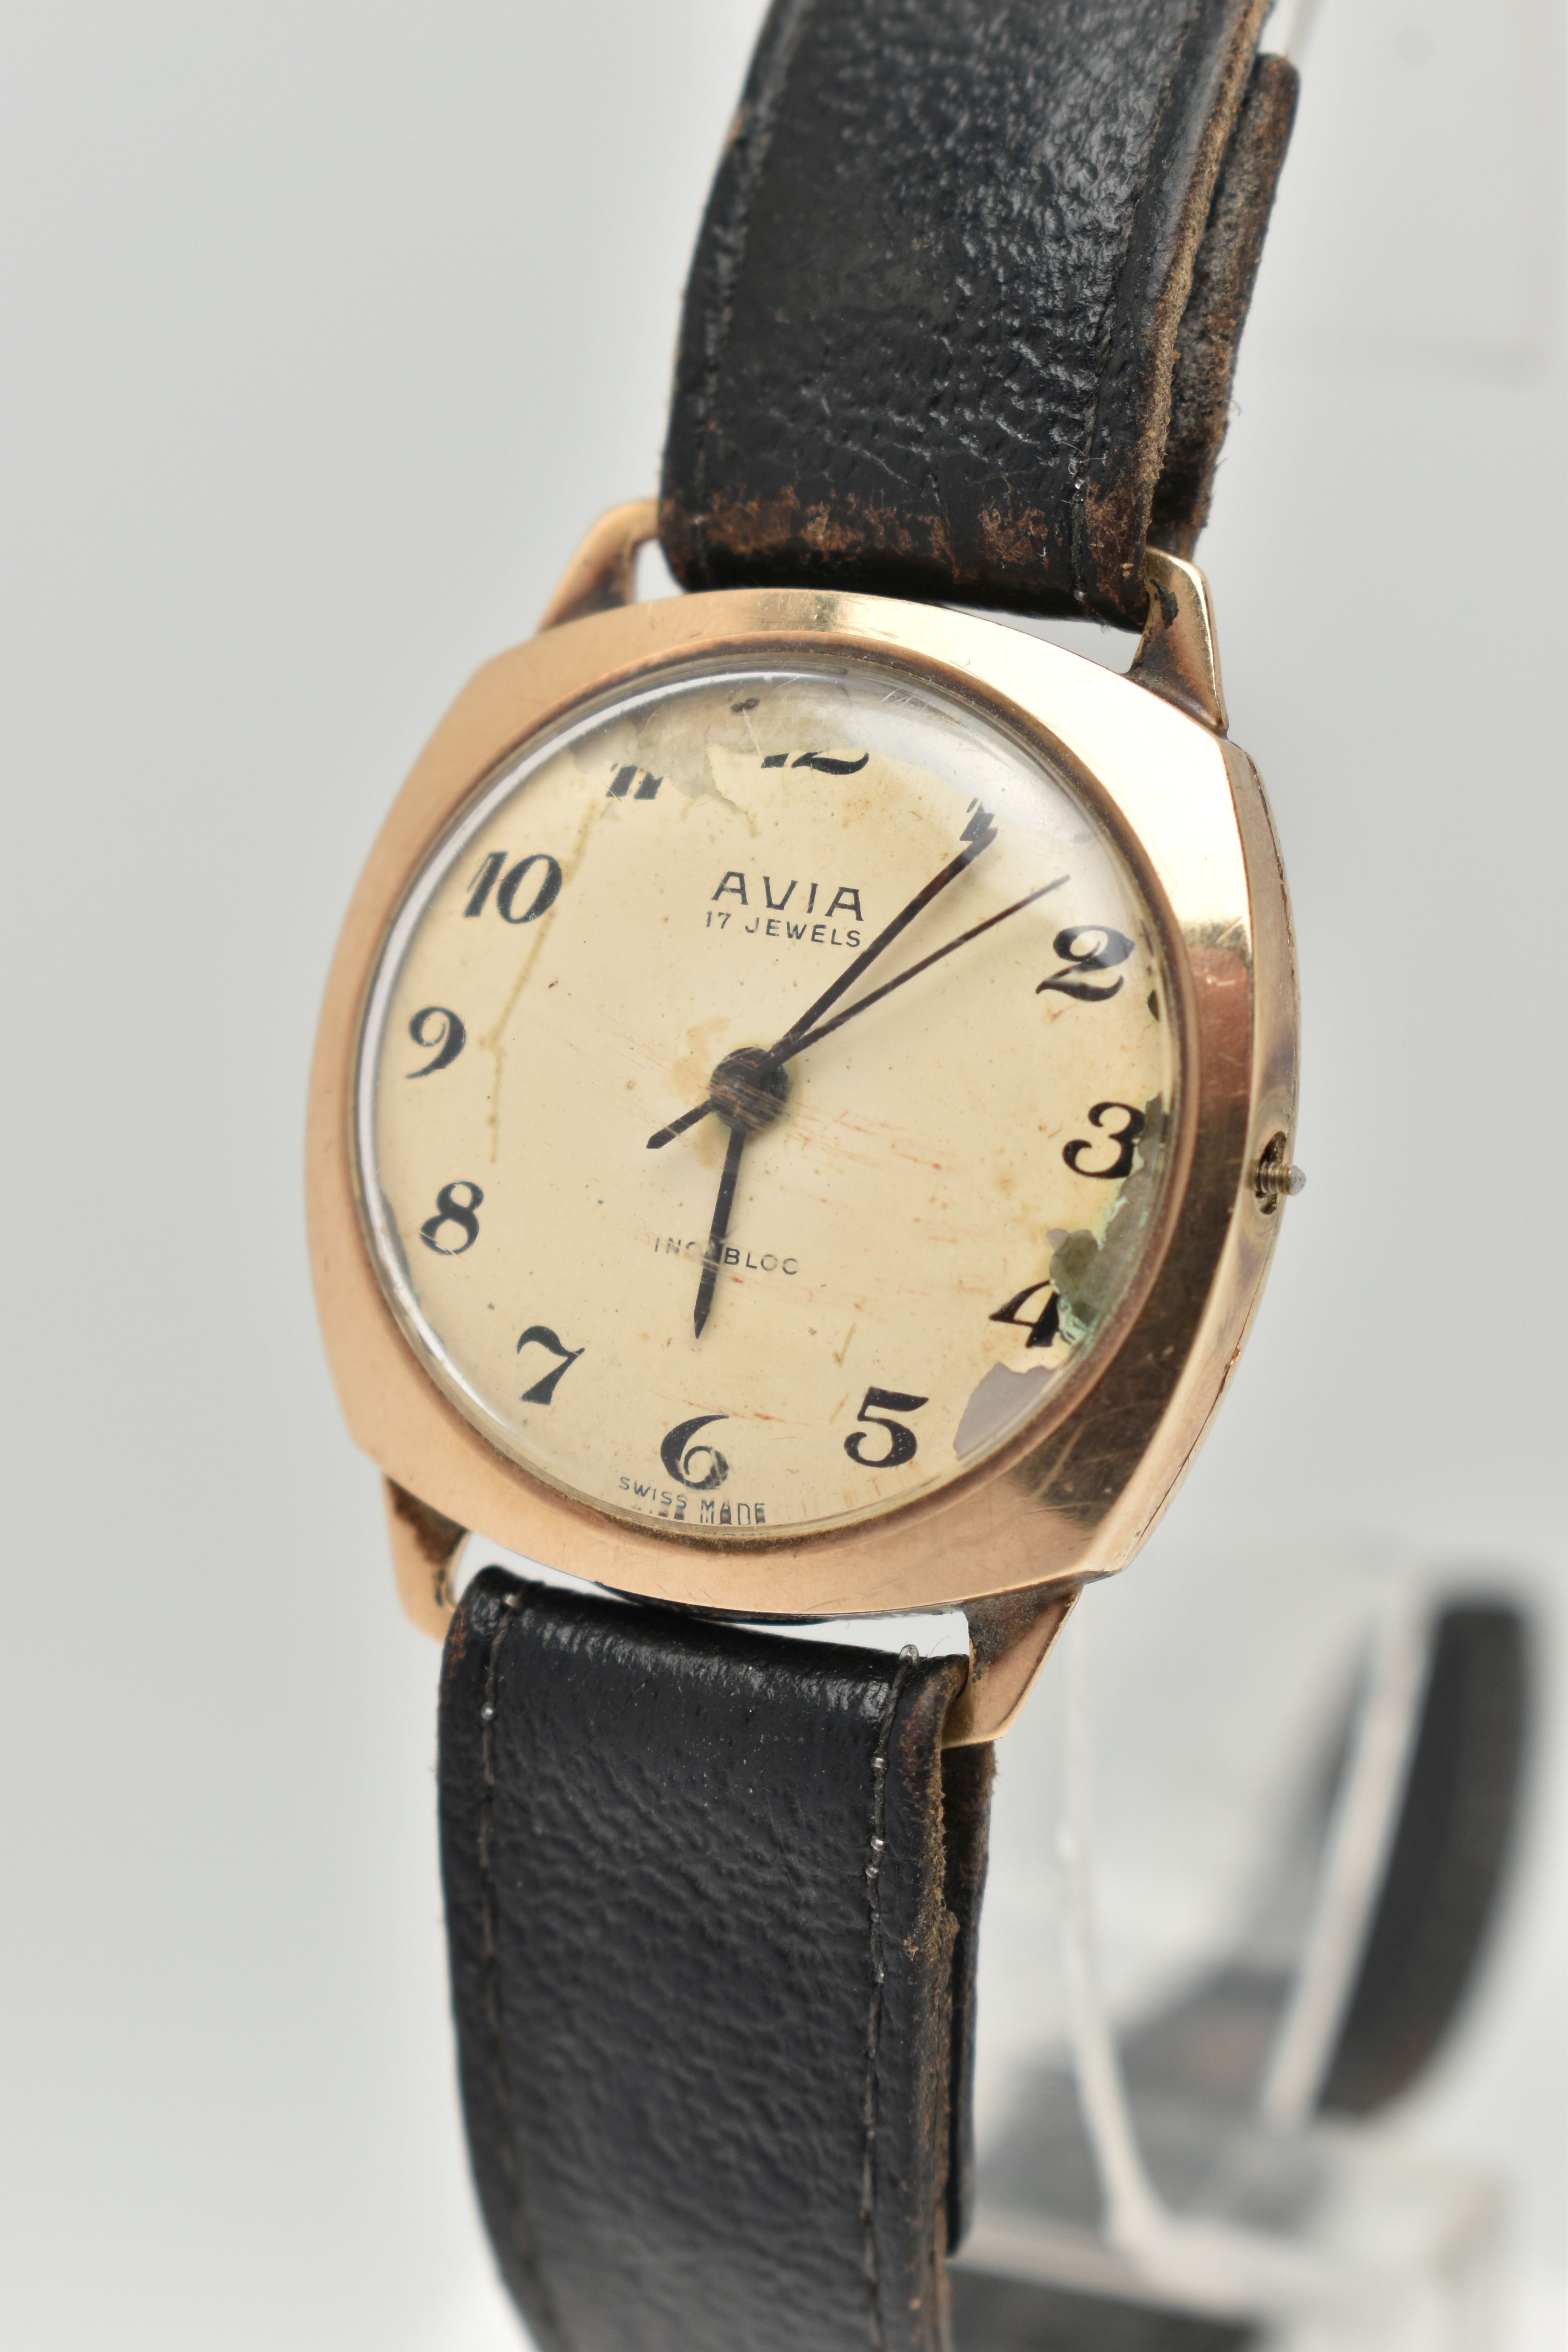 A GENTS 9CT GOLD 'AVIA' WRISTWATCH, manual wind (missing crown), round cream dial signed 'Avia 17 - Image 2 of 6